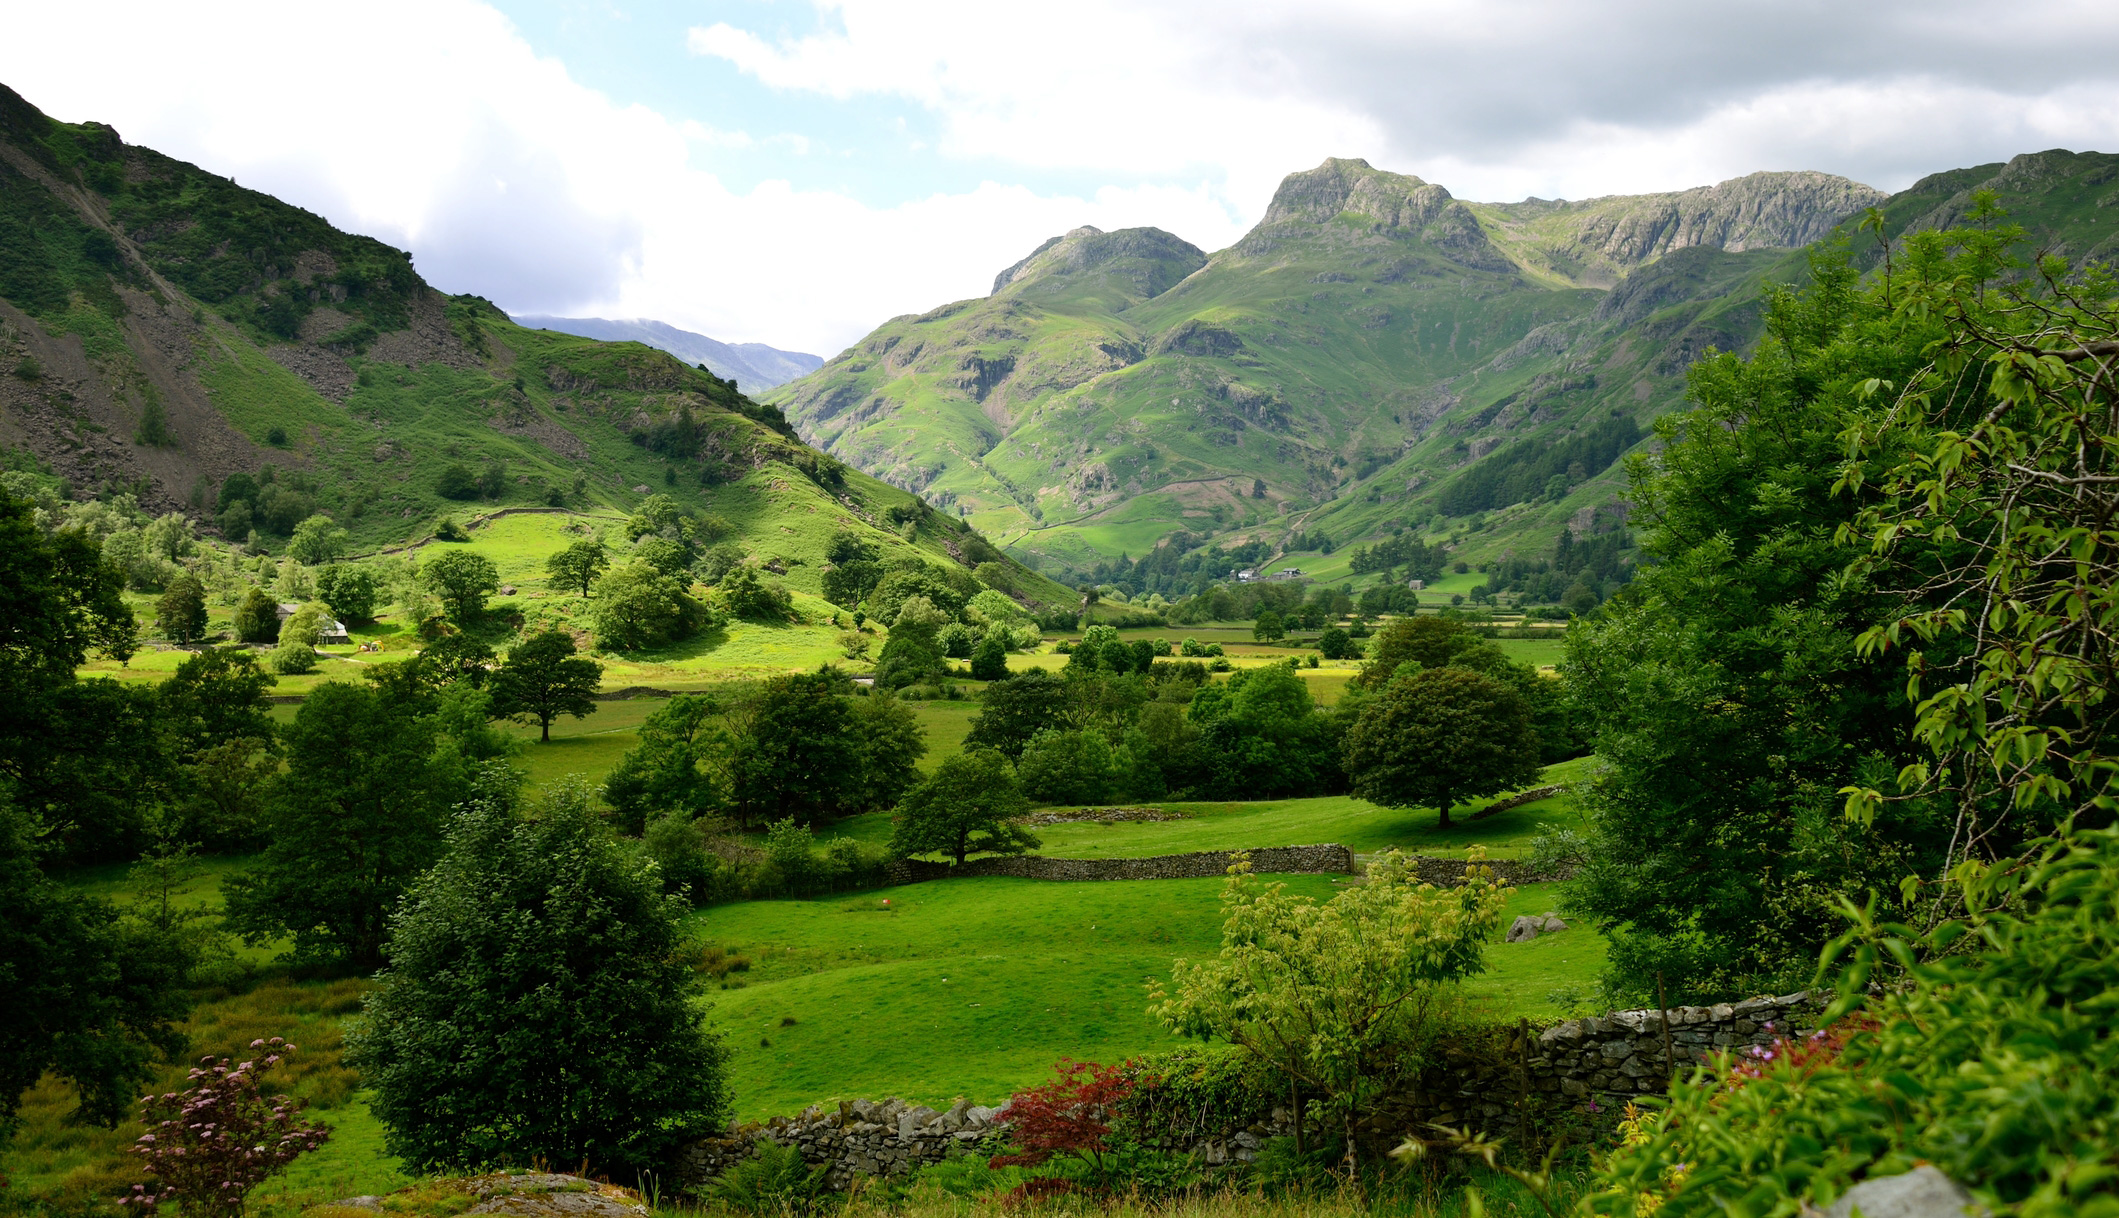 The Langdale Pikes along the Cumbria Way